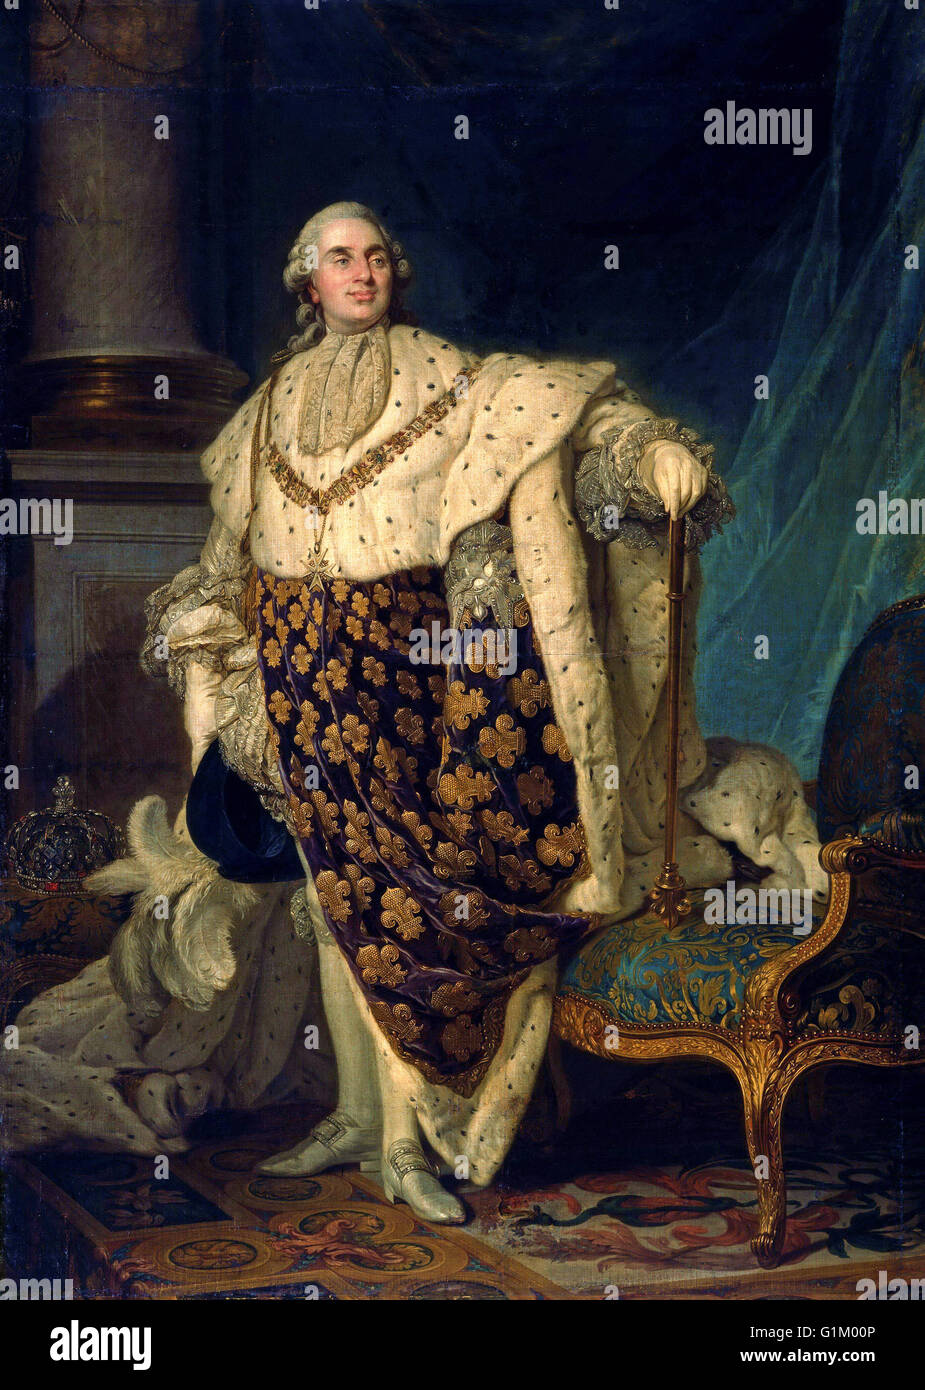 LOUIS XVI (1754-1793).  King of France, 1774-1792. On his coronation day, 11 June 1775, painted by Joseph Siffred Duplessis, 1776-77. Stock Photo